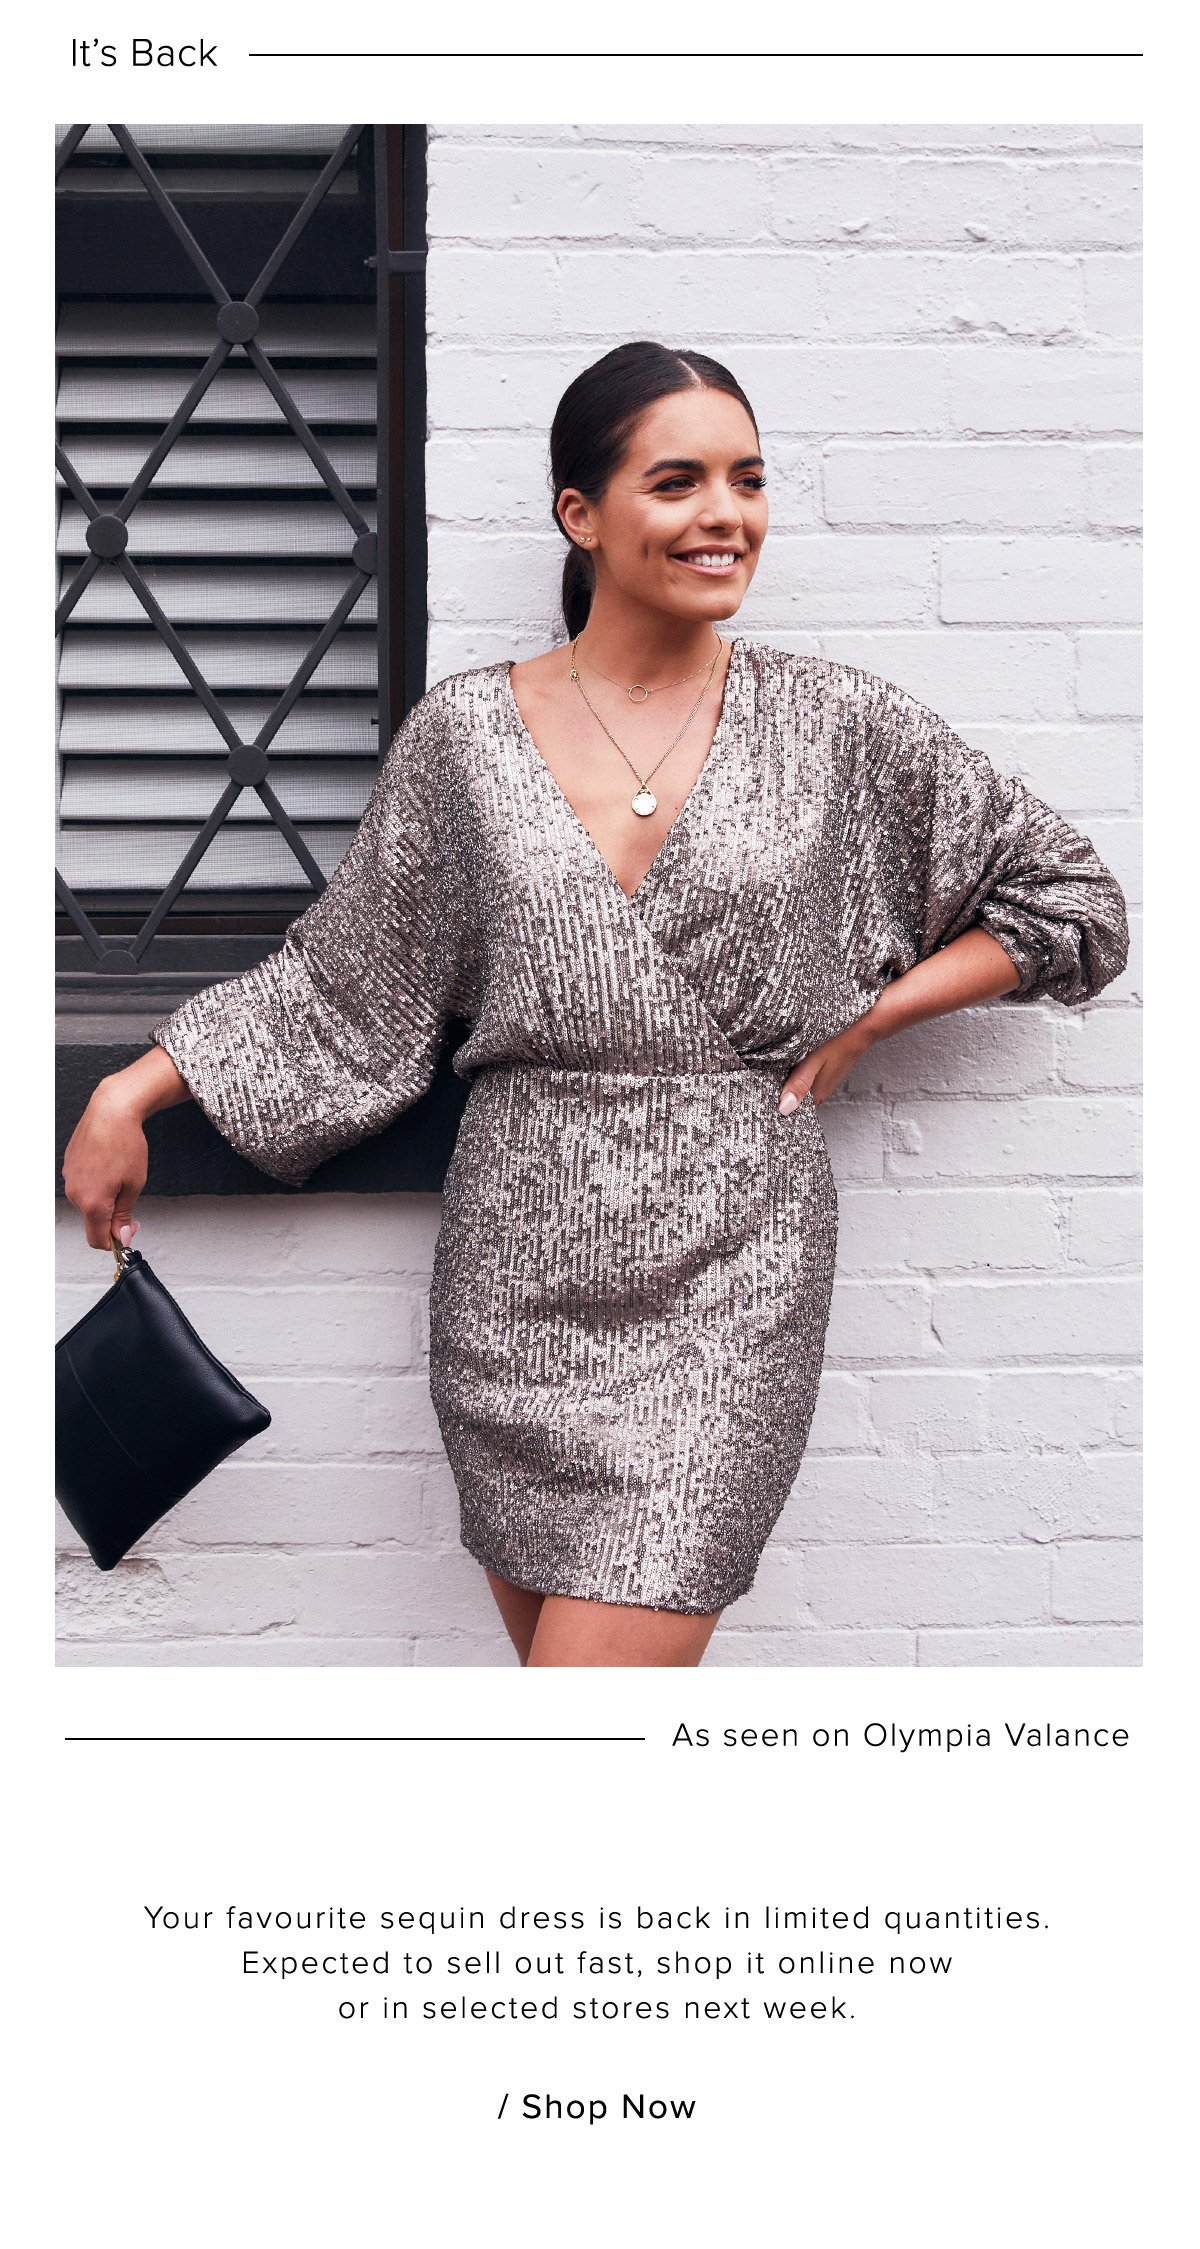 The Sequin Mini Dress is back ...